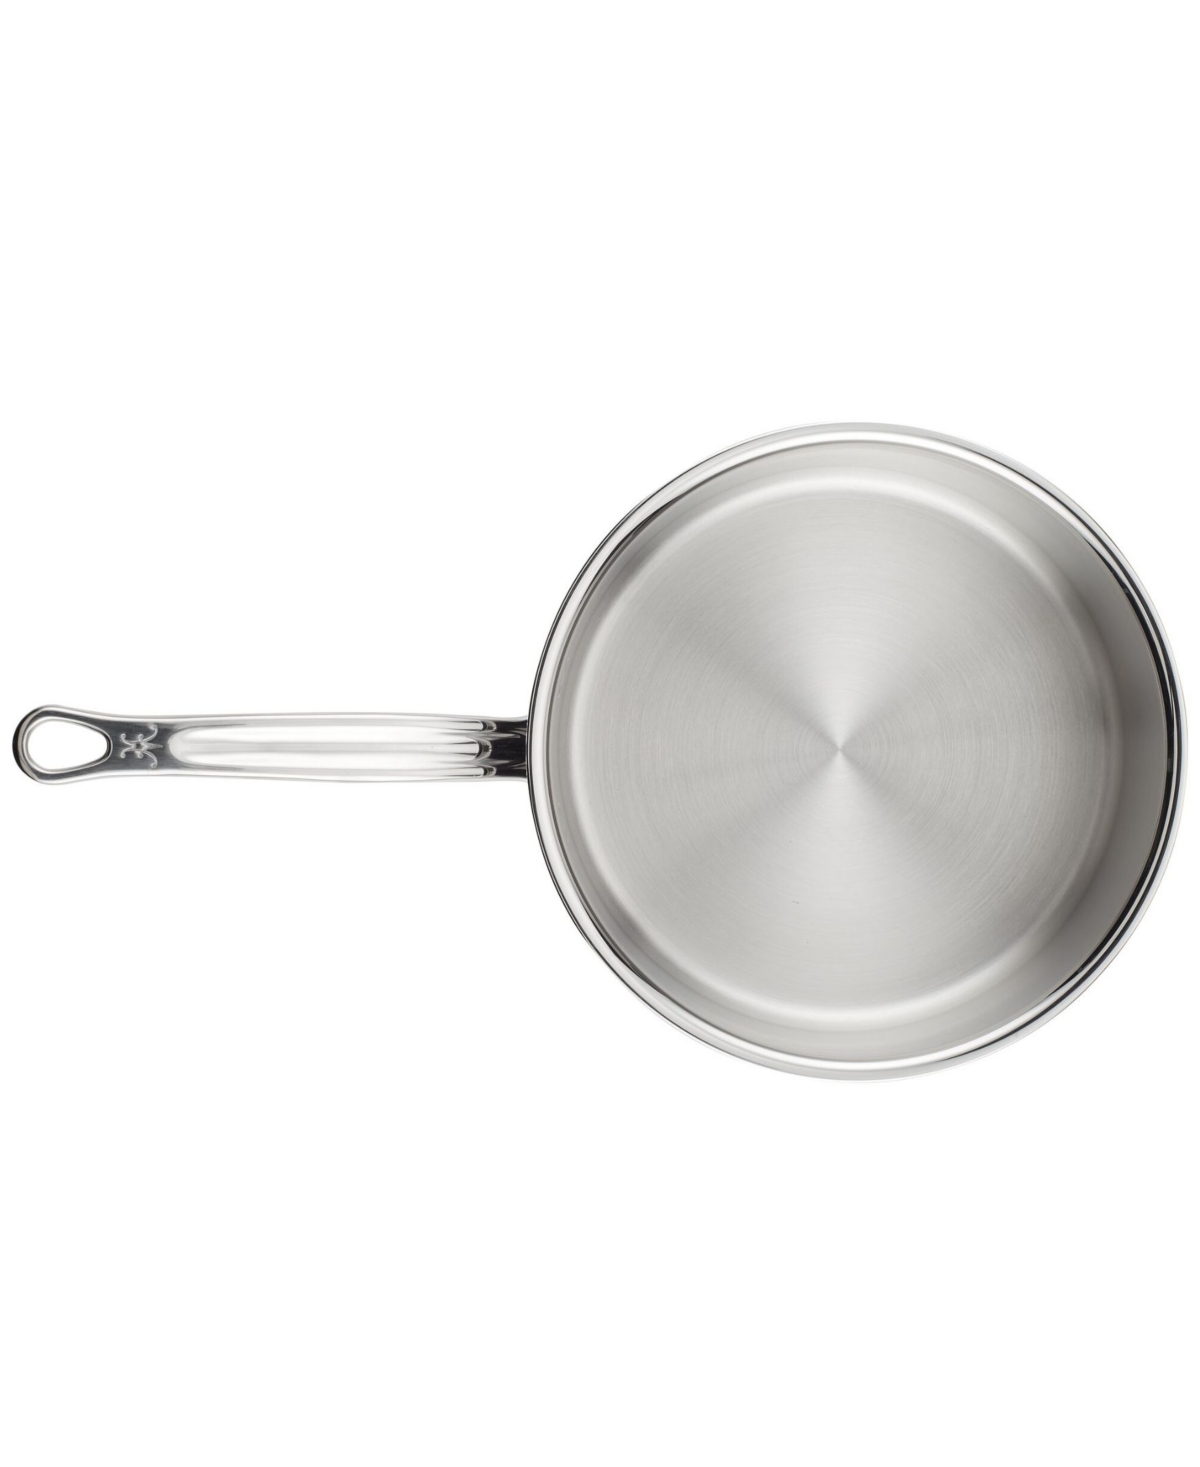 Shop Hestan Probond Clad Stainless Steel 3-quart Covered Saucepan In Silver